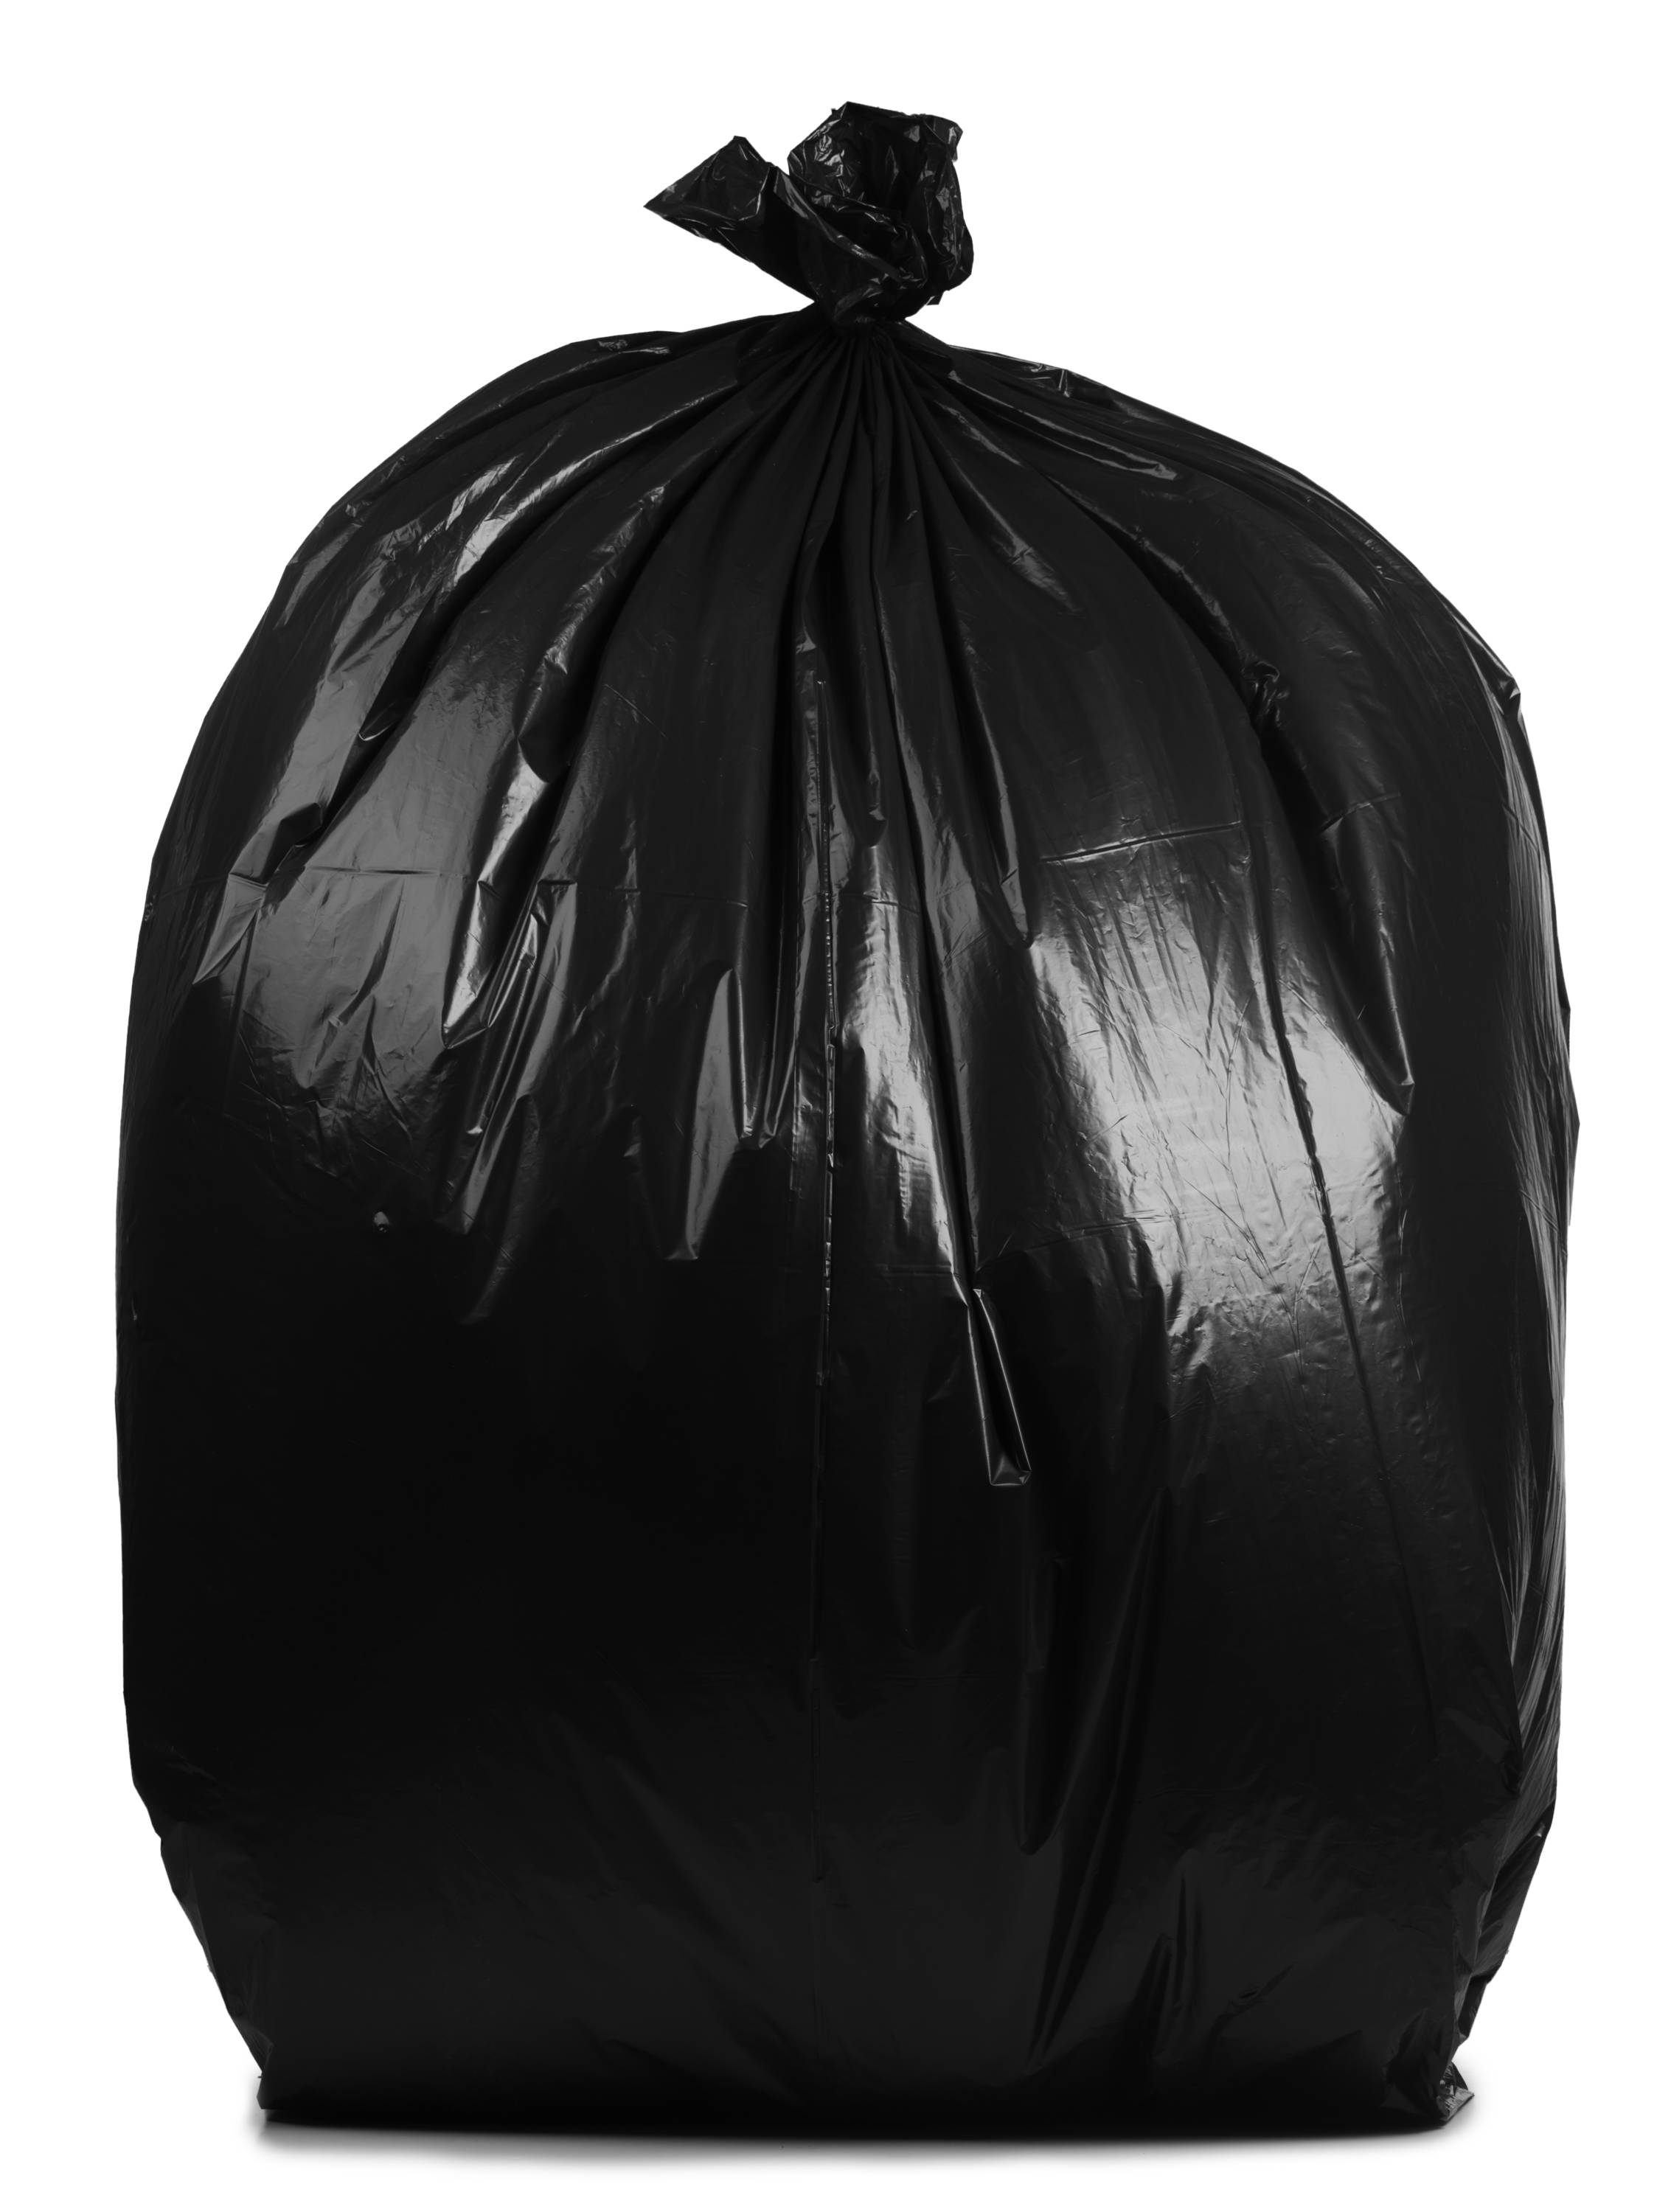 100 HEAVY DUTY BLACK REFUSE SACKS STRONG THICK RUBBISH BAGS BIN LINERS 